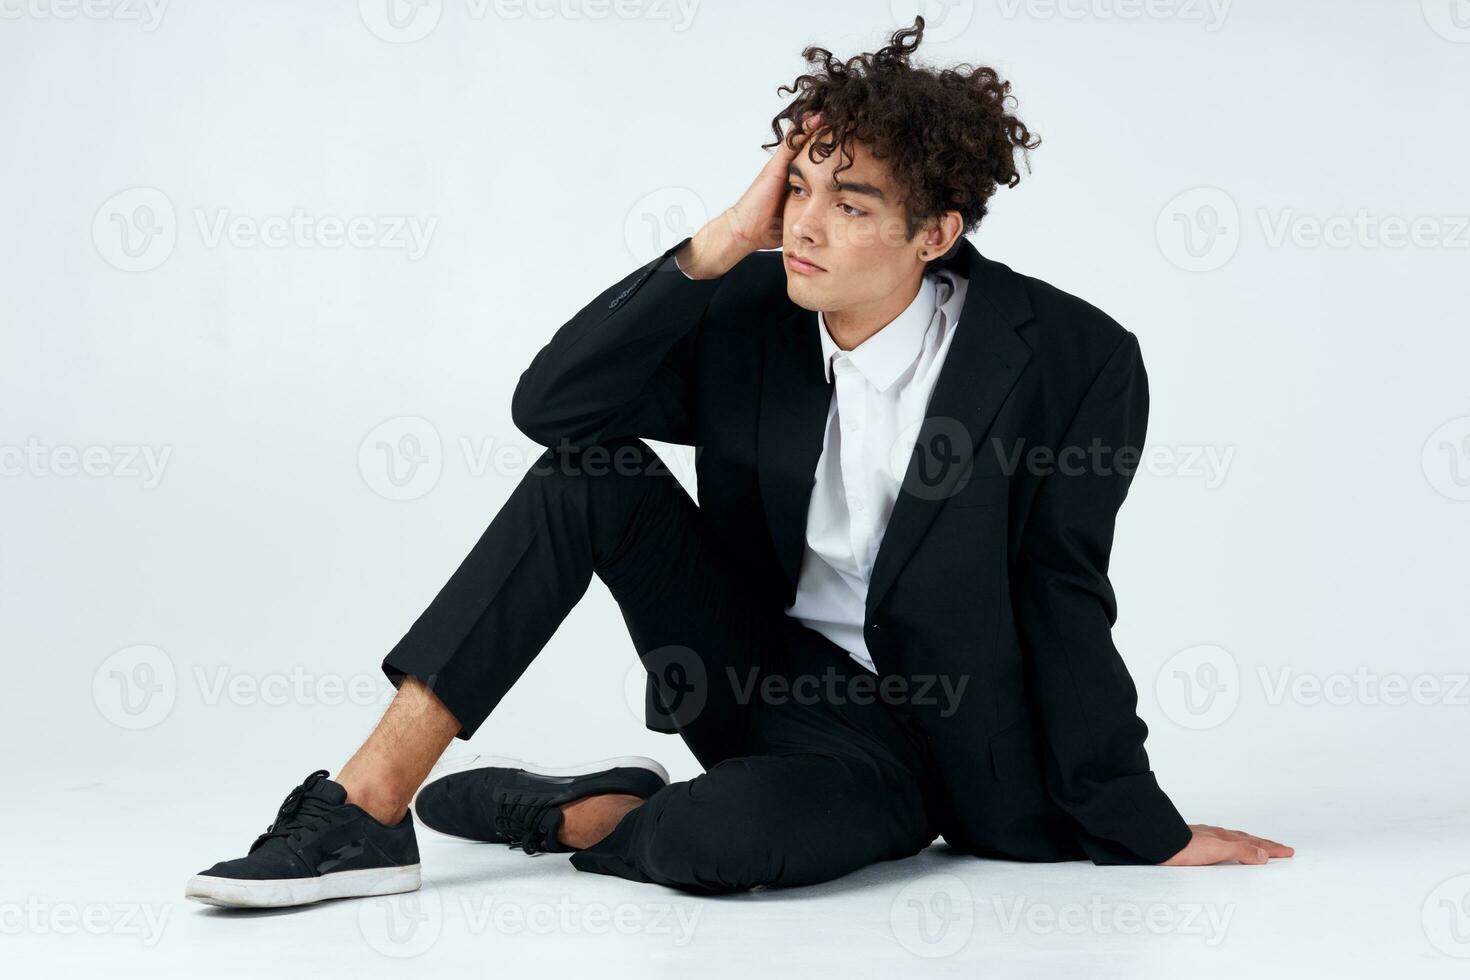 business man in suit curly hair light background studio fun photo